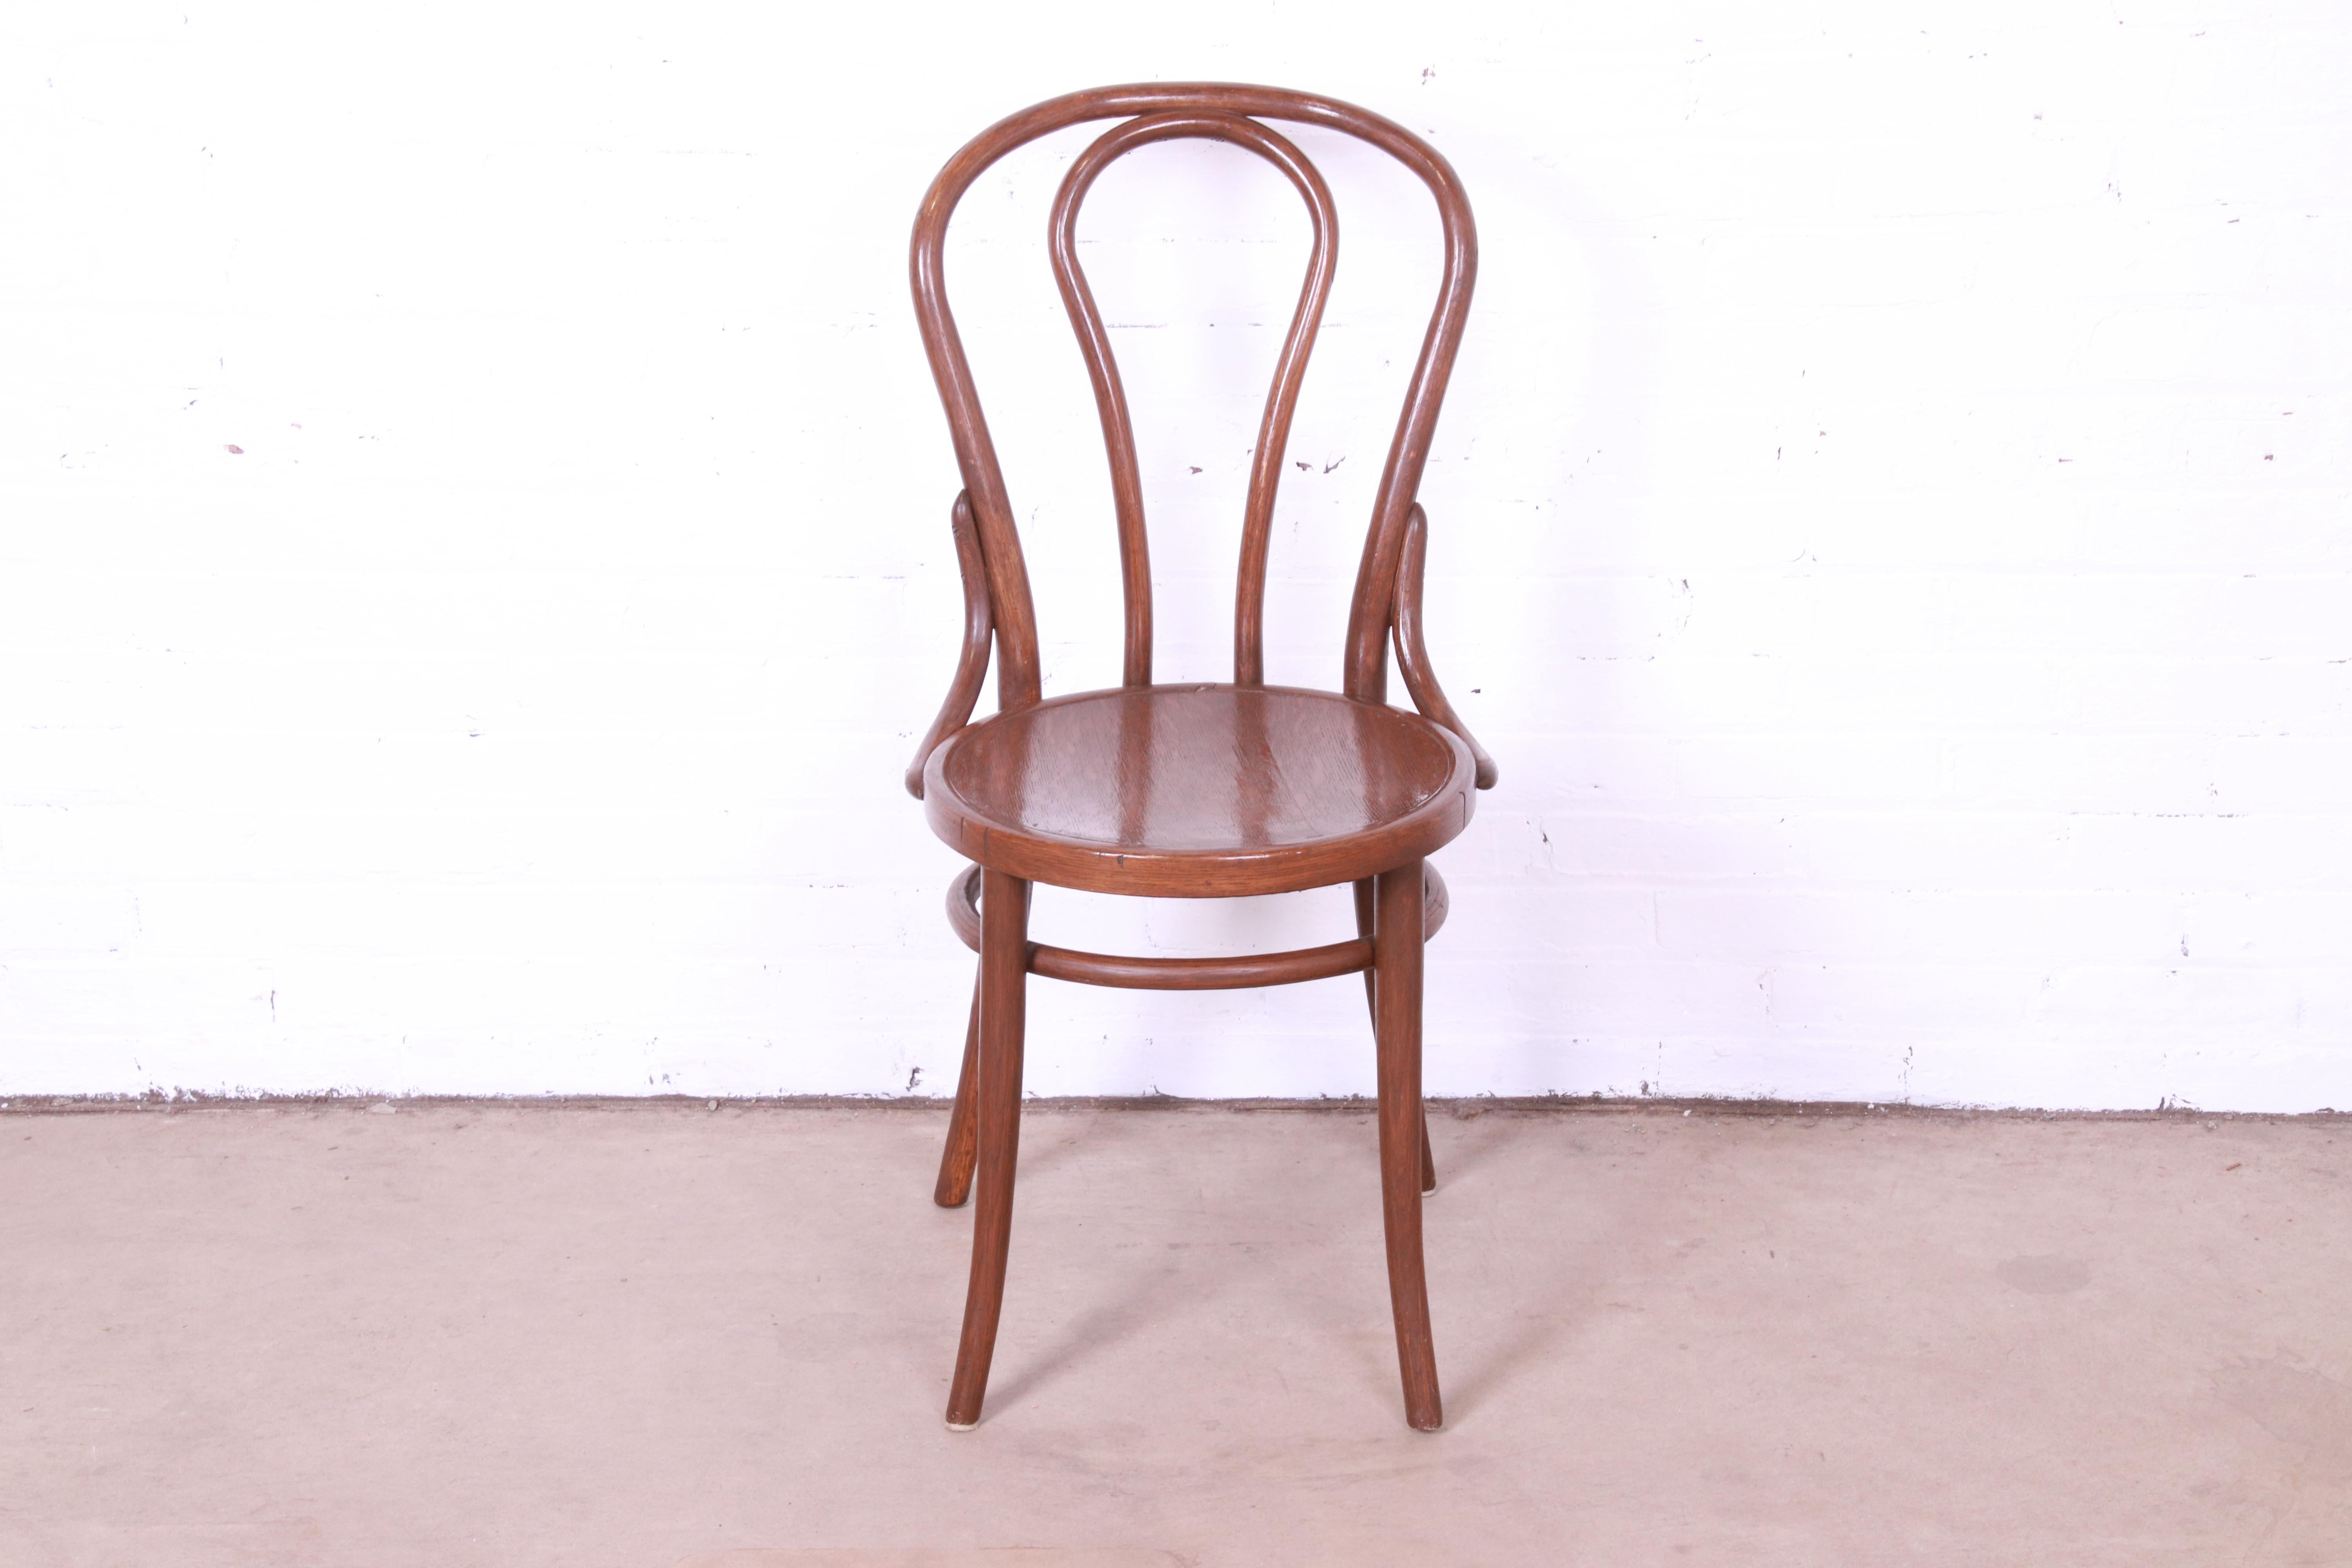 A beautiful bentwood dining chair, cafe side chair, or desk chair

Recently procured from Frank Lloyd Wright's DeRhodes House

Attributed to Thonet

USA, Circa 1940s

Measures: 17.25